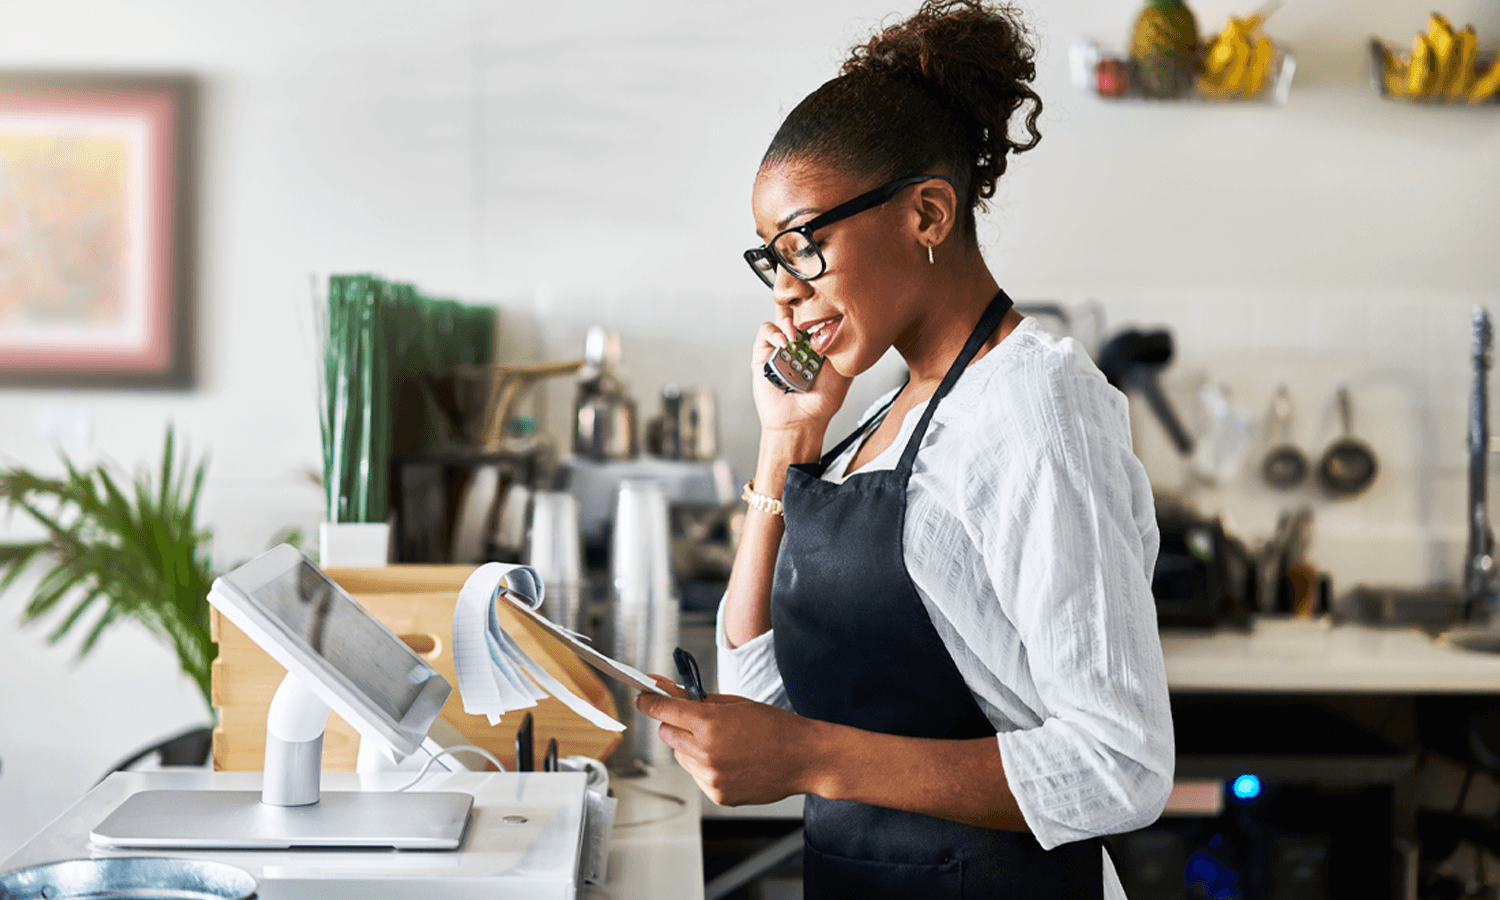 Three Basic Things Every Small Business Should Know